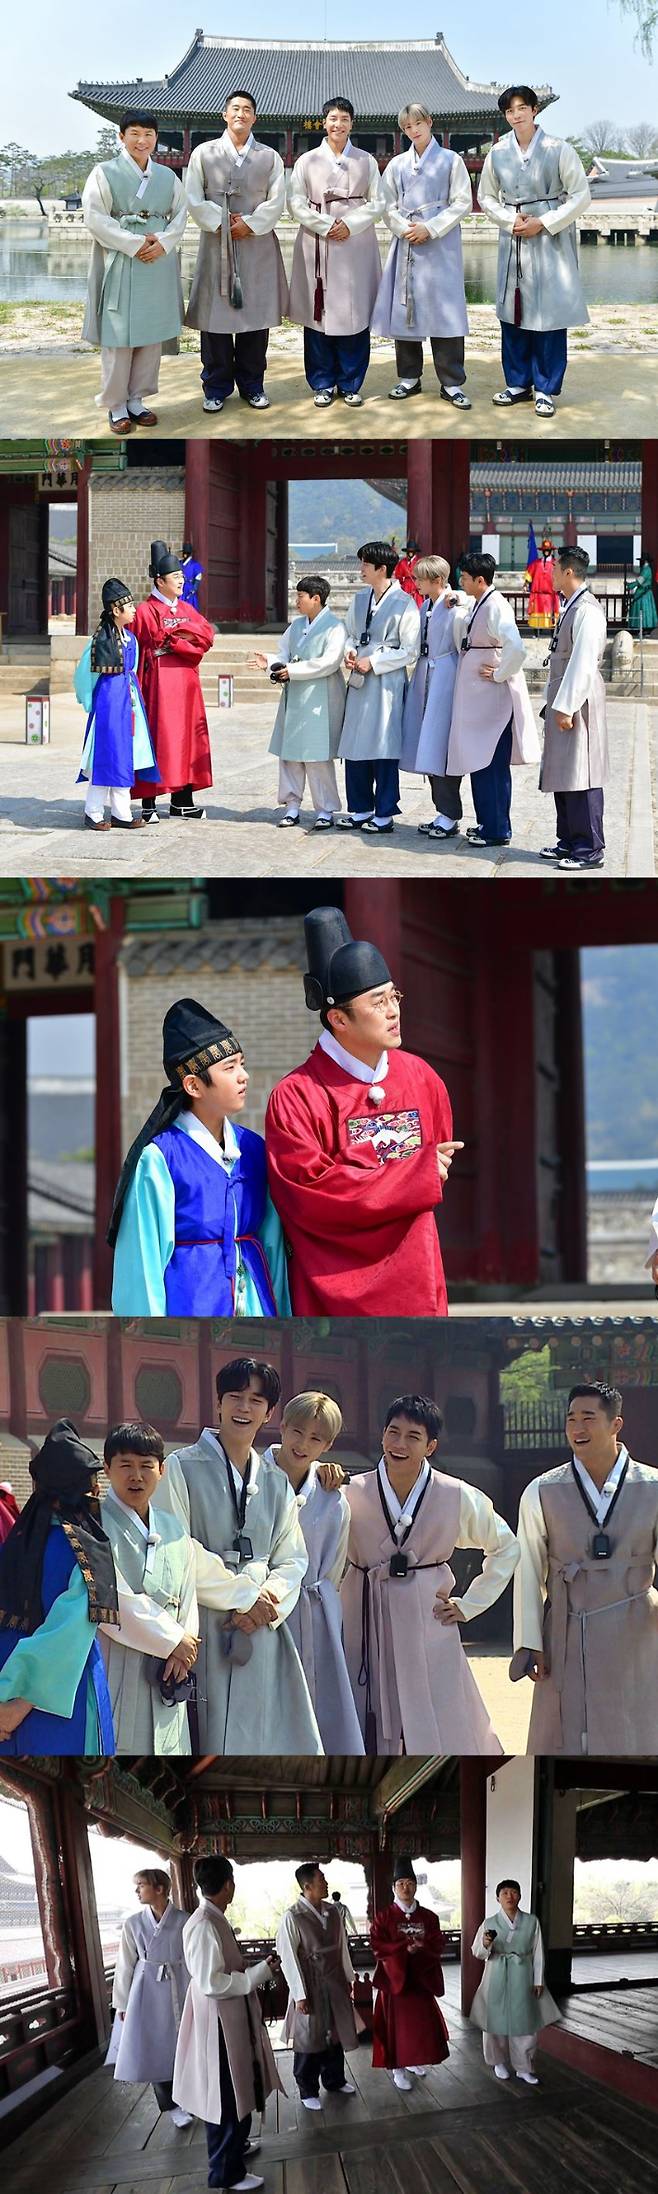 SBS All The Butlers, which will be broadcasted at 6:25 pm on the 2nd, will release the members who returned to Korea under Japan rule by time slip.This All The Butlers shoot was the first entertainment to be conducted with permission from the entire gyeongbokgung.Inside the Gyeongbokgung, which has no visitors, bureaucrats, palaces, Nine, and warriors wandered around, reminiscent of the actual Korean under Japan rule palace.The master who made this possible is Gyeongbokgung, the first non-personal master of All The Butlers.According to the production crew, Master Gyeongbokgung opened the special space of Gyeongbokgung, including the second floor space of Gyeonghoeru and the inside of the gyeongjeongjeon, and showed a large master.On this day, Korean history instructor Choi Tae-sung and actor Kim Kang-hoon will be on the show. SBS All The Butlers - All the Archers will be broadcast at 6:25 pm on the 2nd.